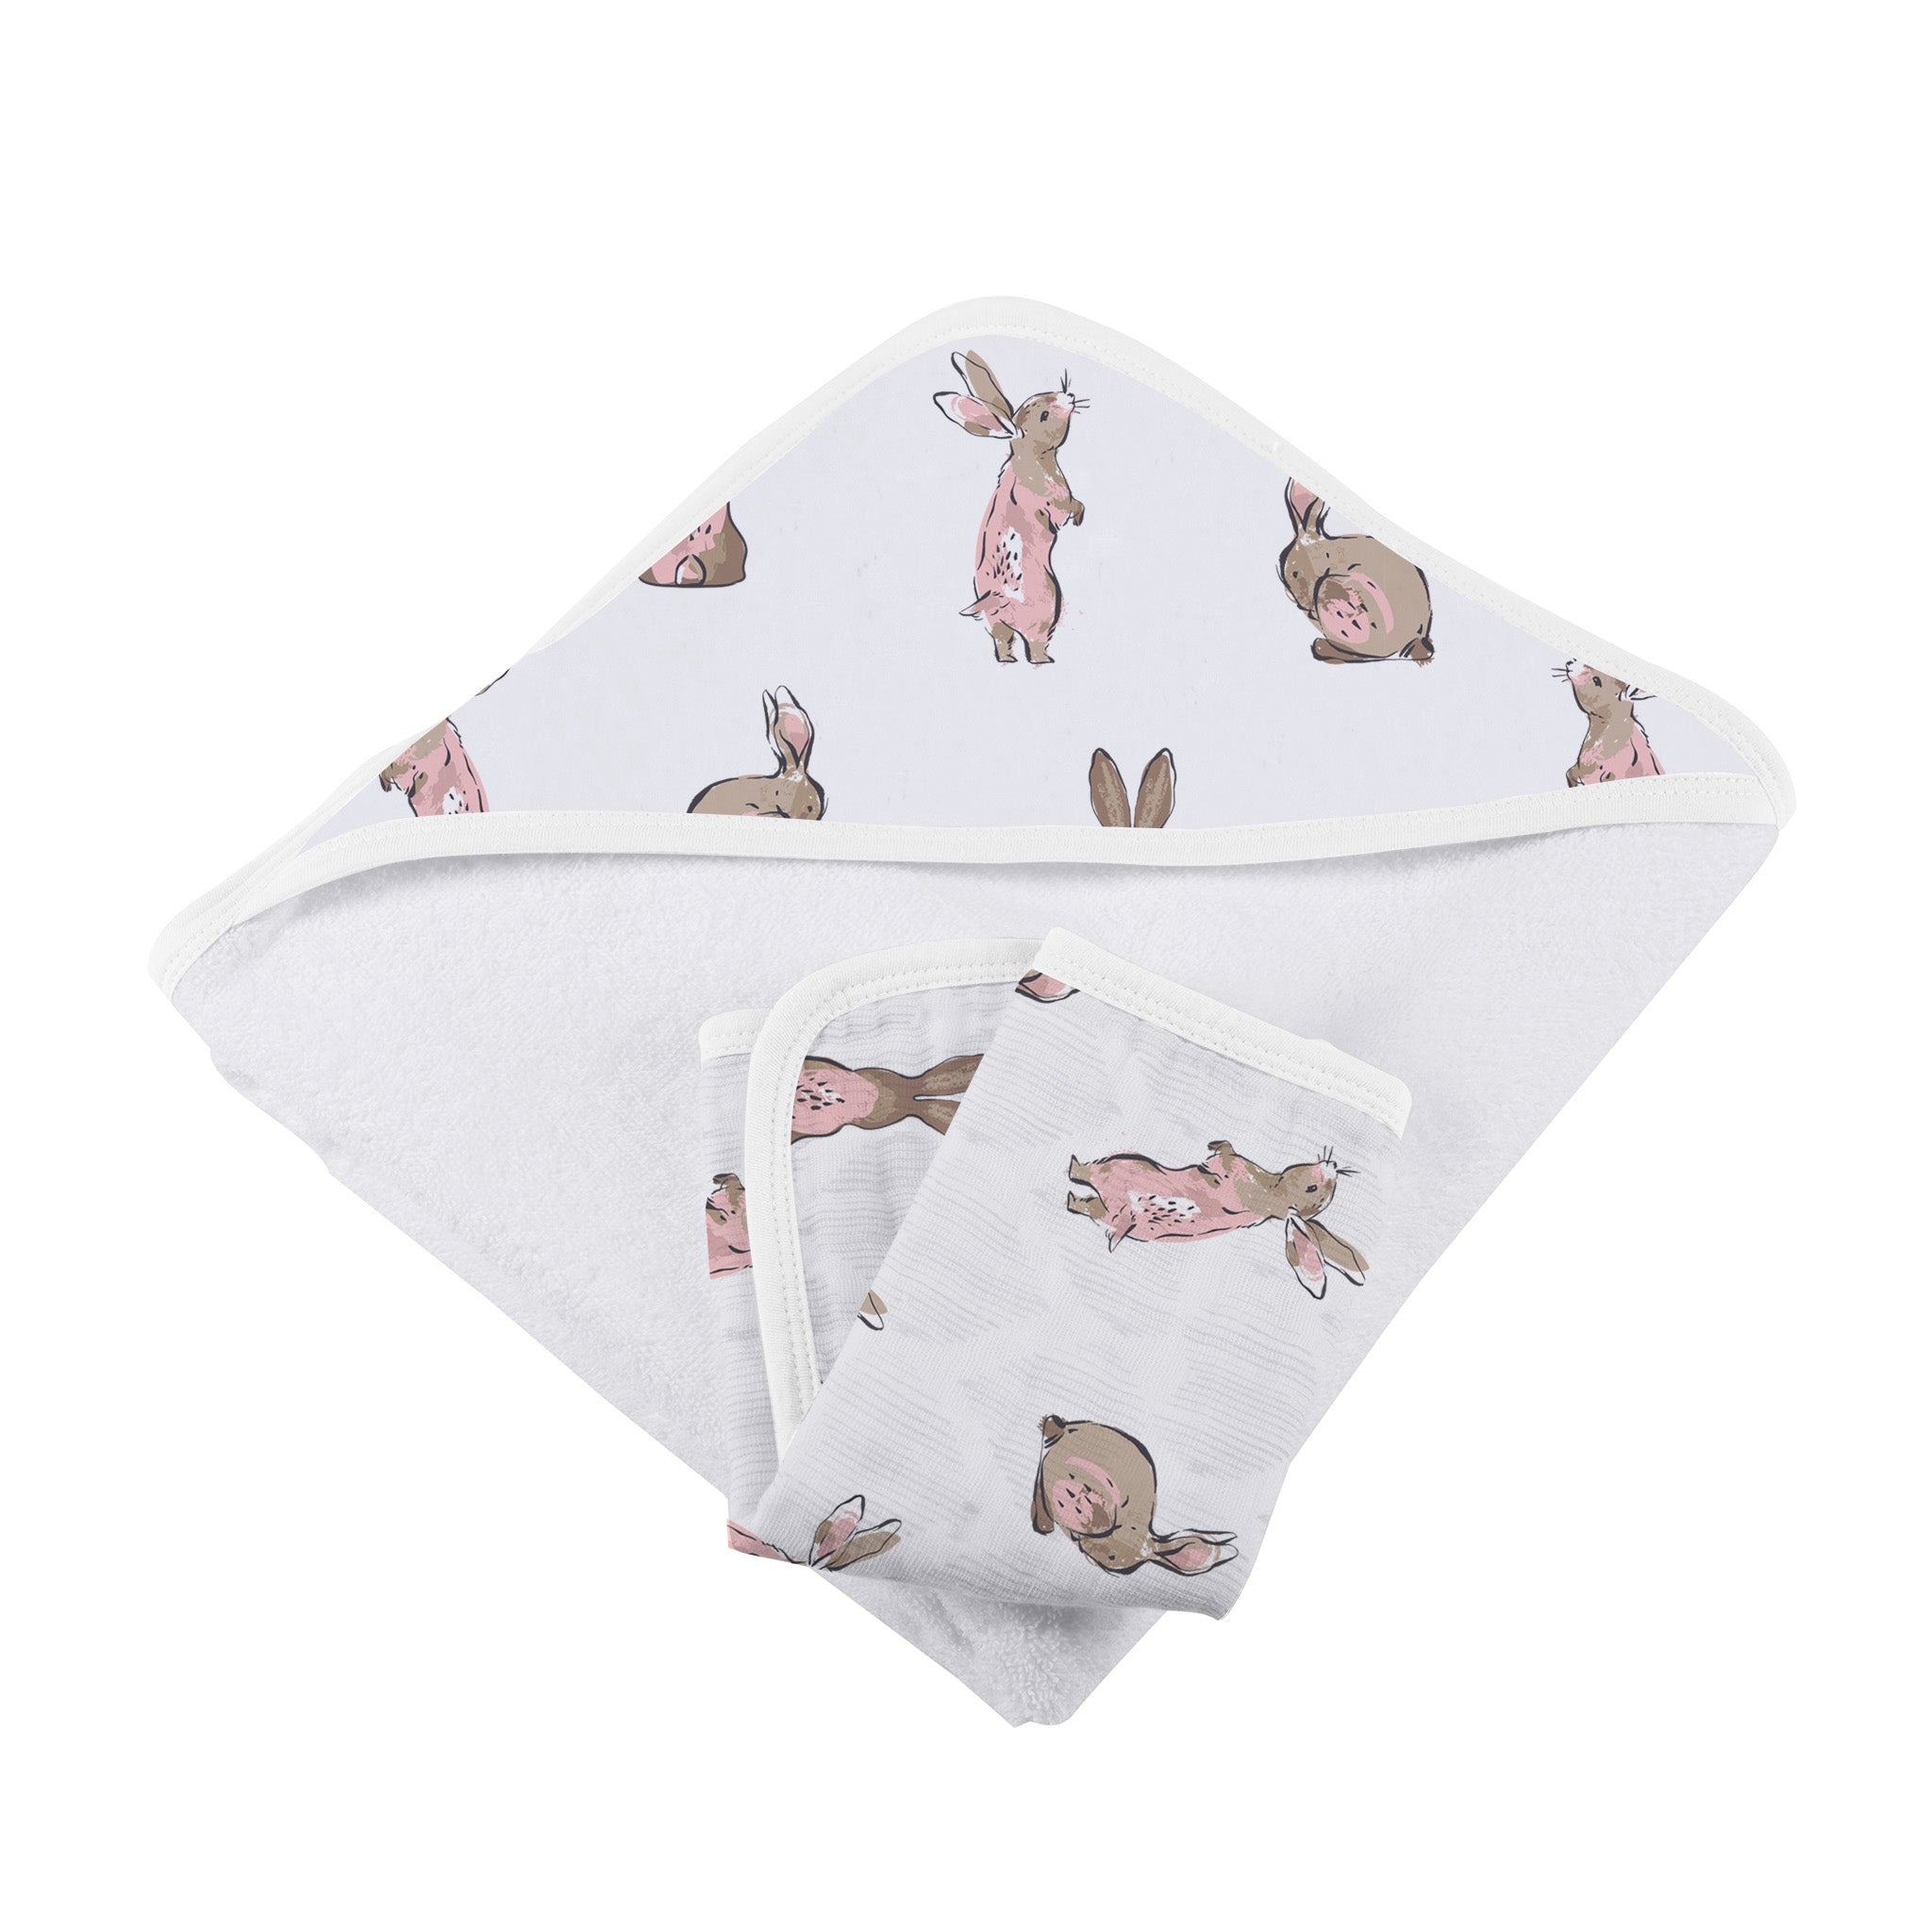 Hooded towel with bunnies with a matching washcloth